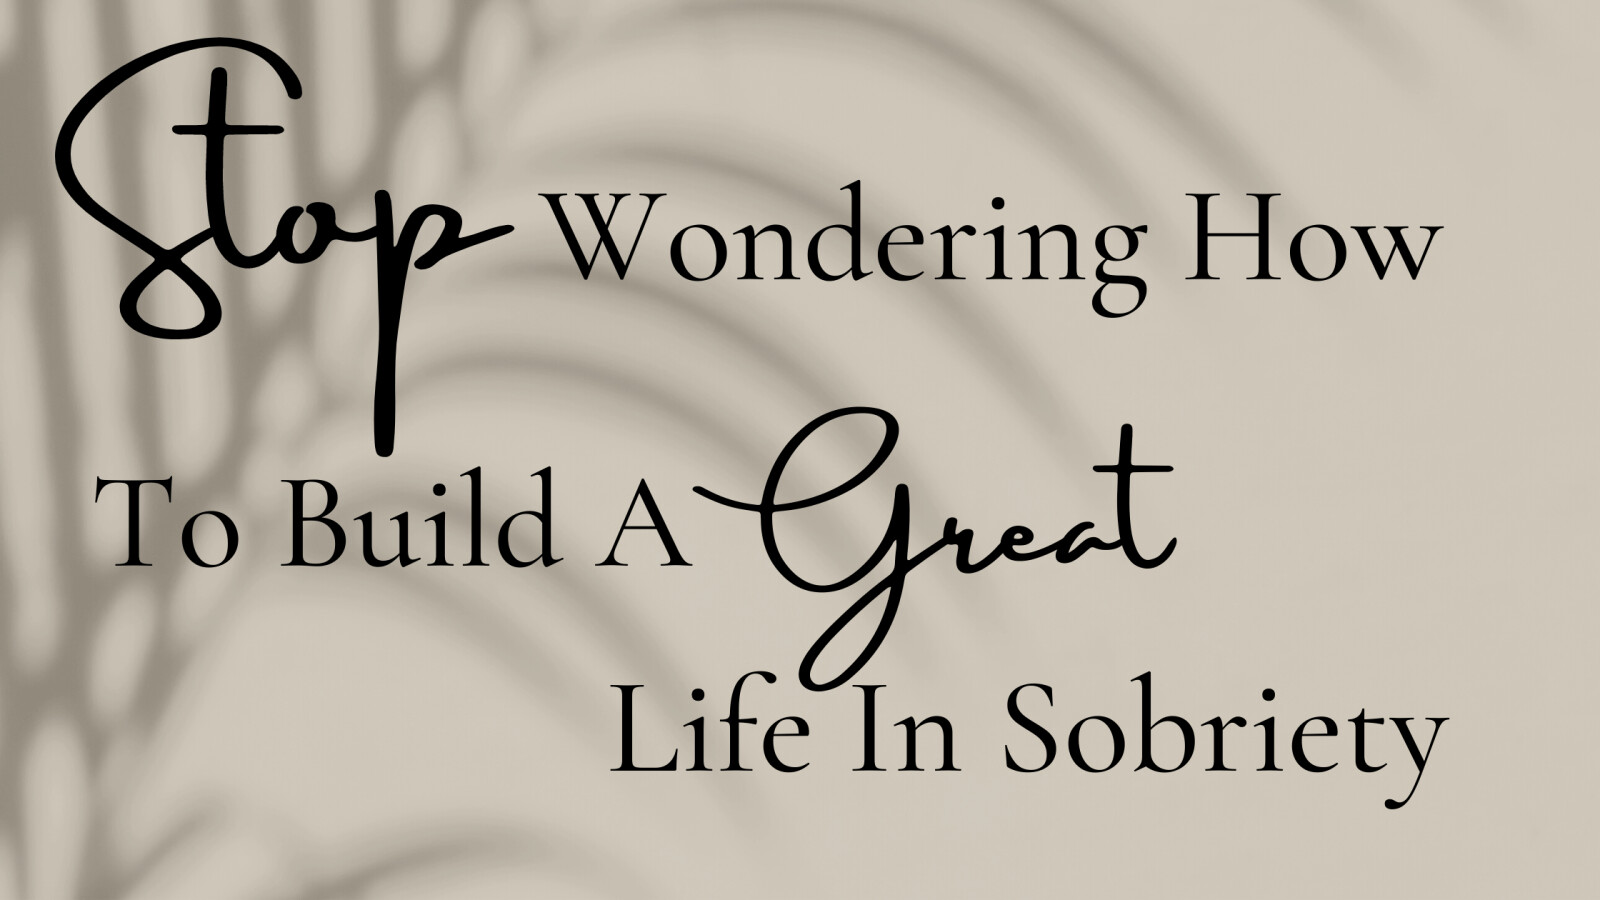 Stop Wondering How To Build a Great Life in Sobriety